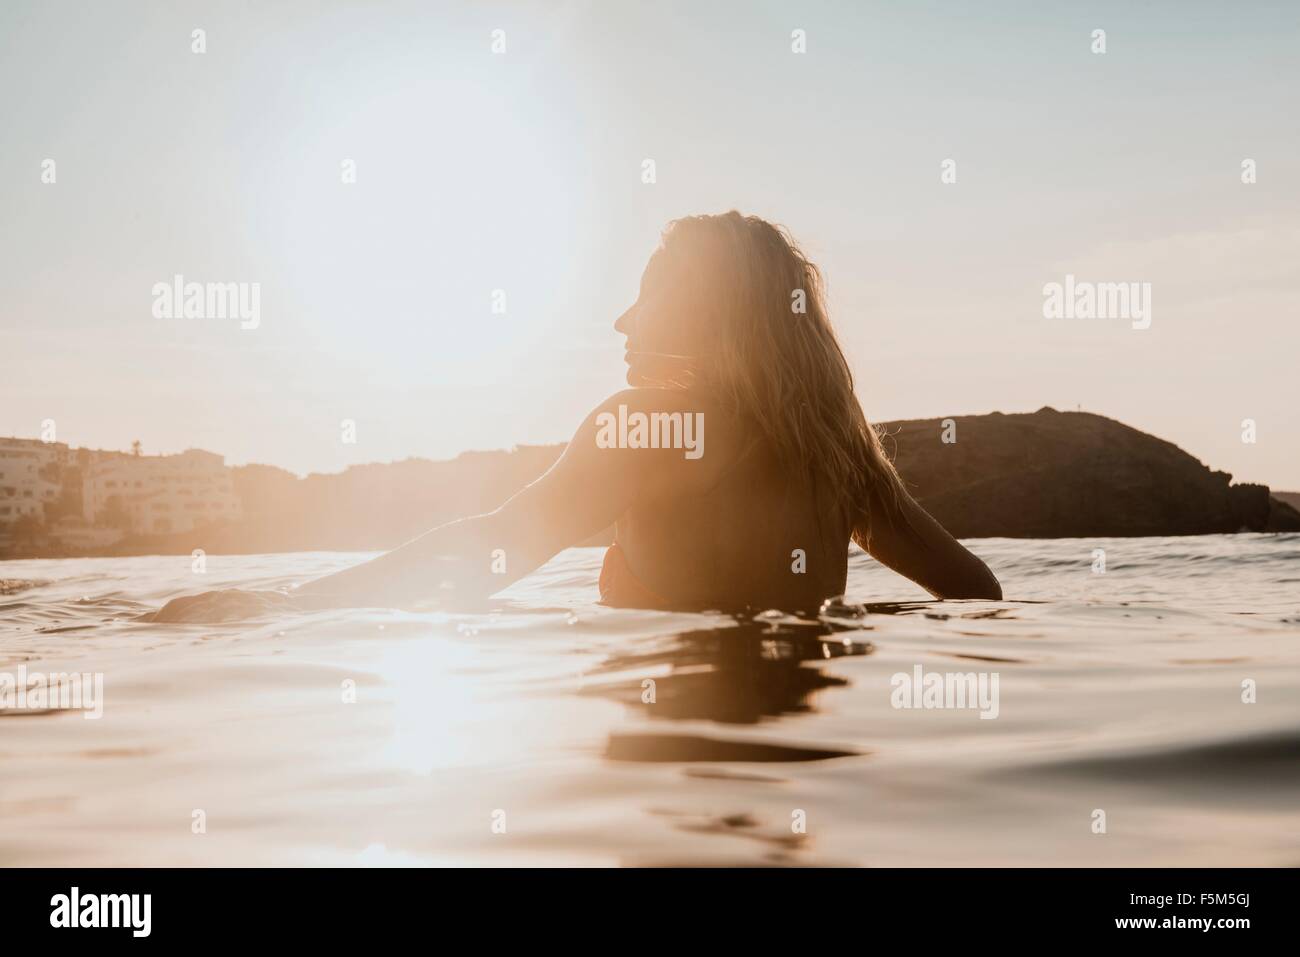 Silhouetted woman wading in sea at sunset, Menorca, Balearic islands, Spain Stock Photo